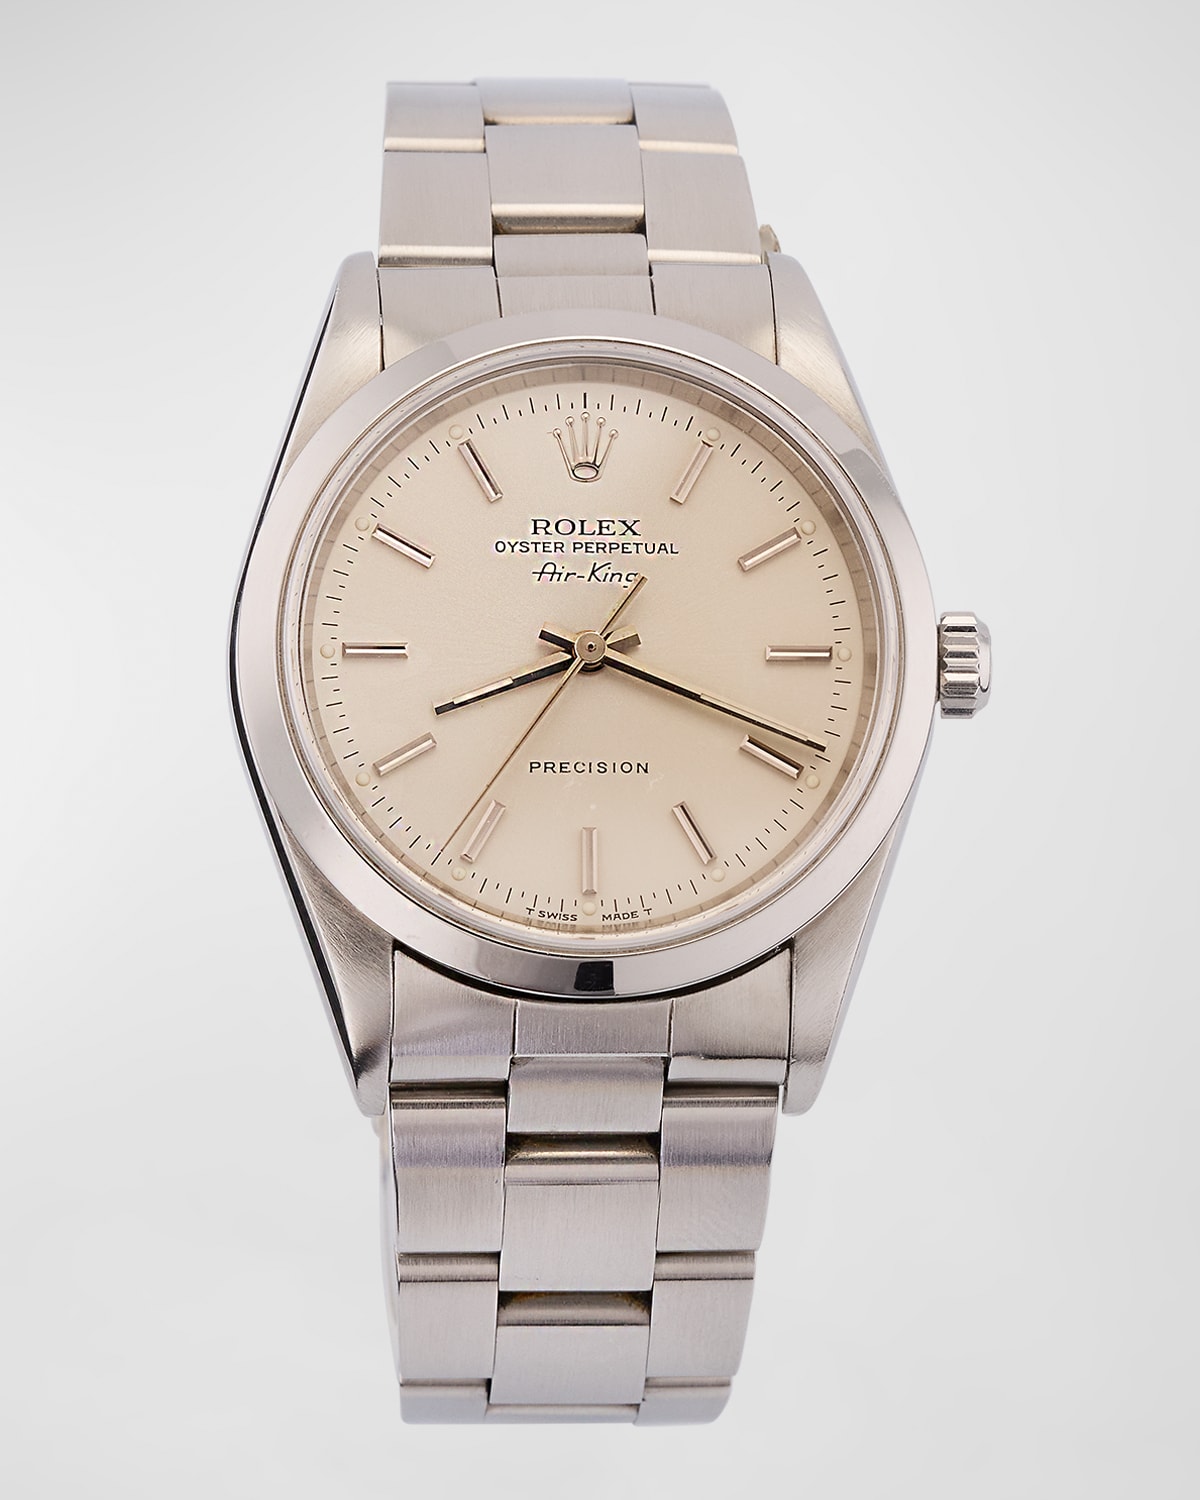 Rolex Oyster Perpetual Air King Precision 34mm Vintage 1997 Watch